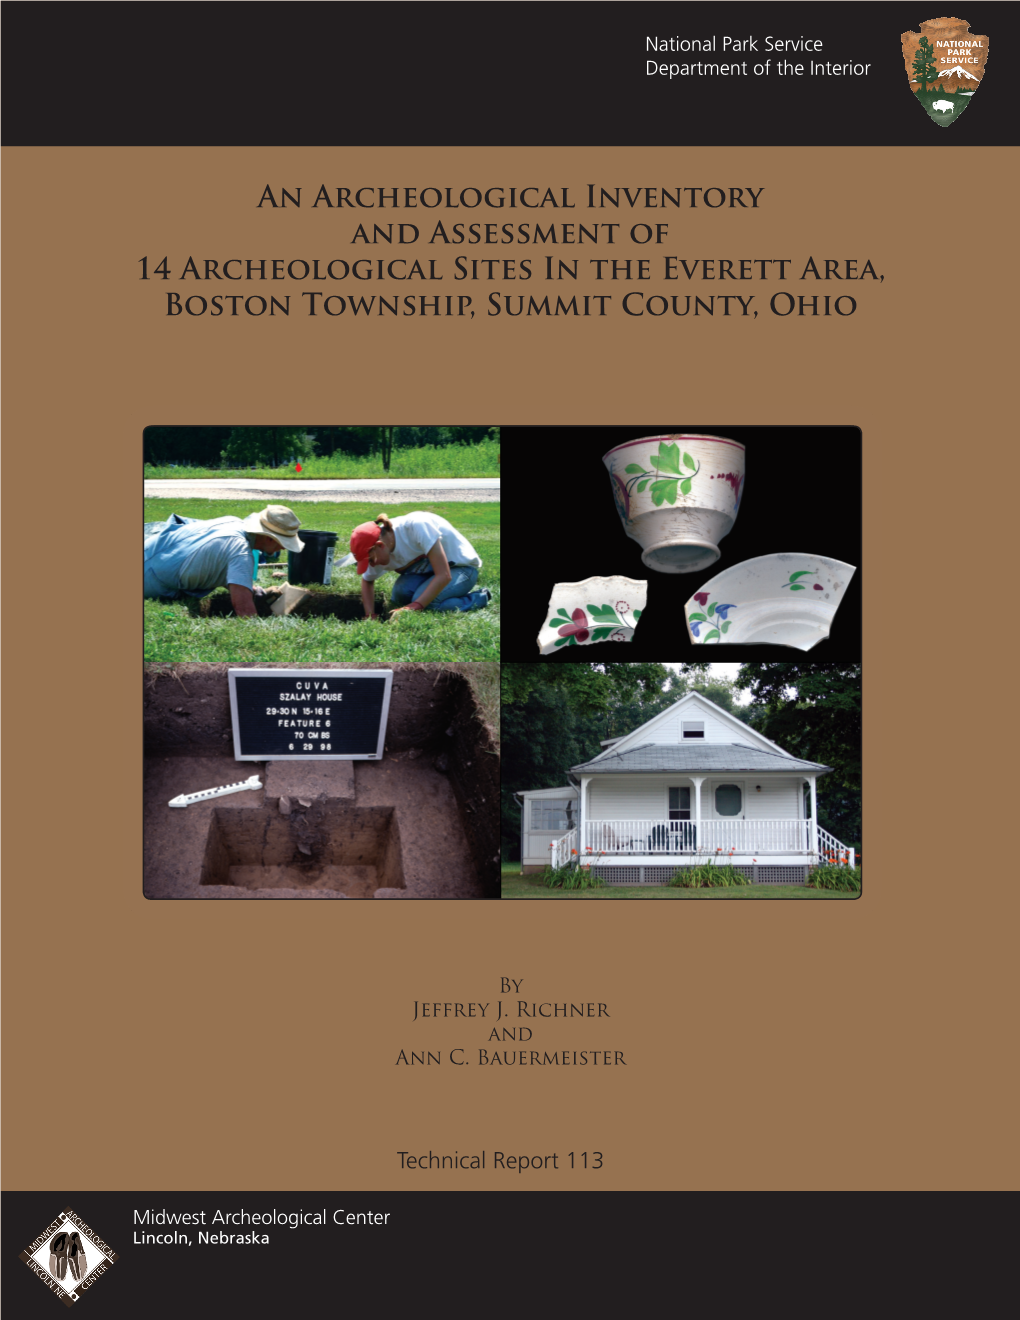 An Archeological Inventory and Assessment of 14 Archeological Sites in the Everett Area, Boston Township, Summit County, Ohio